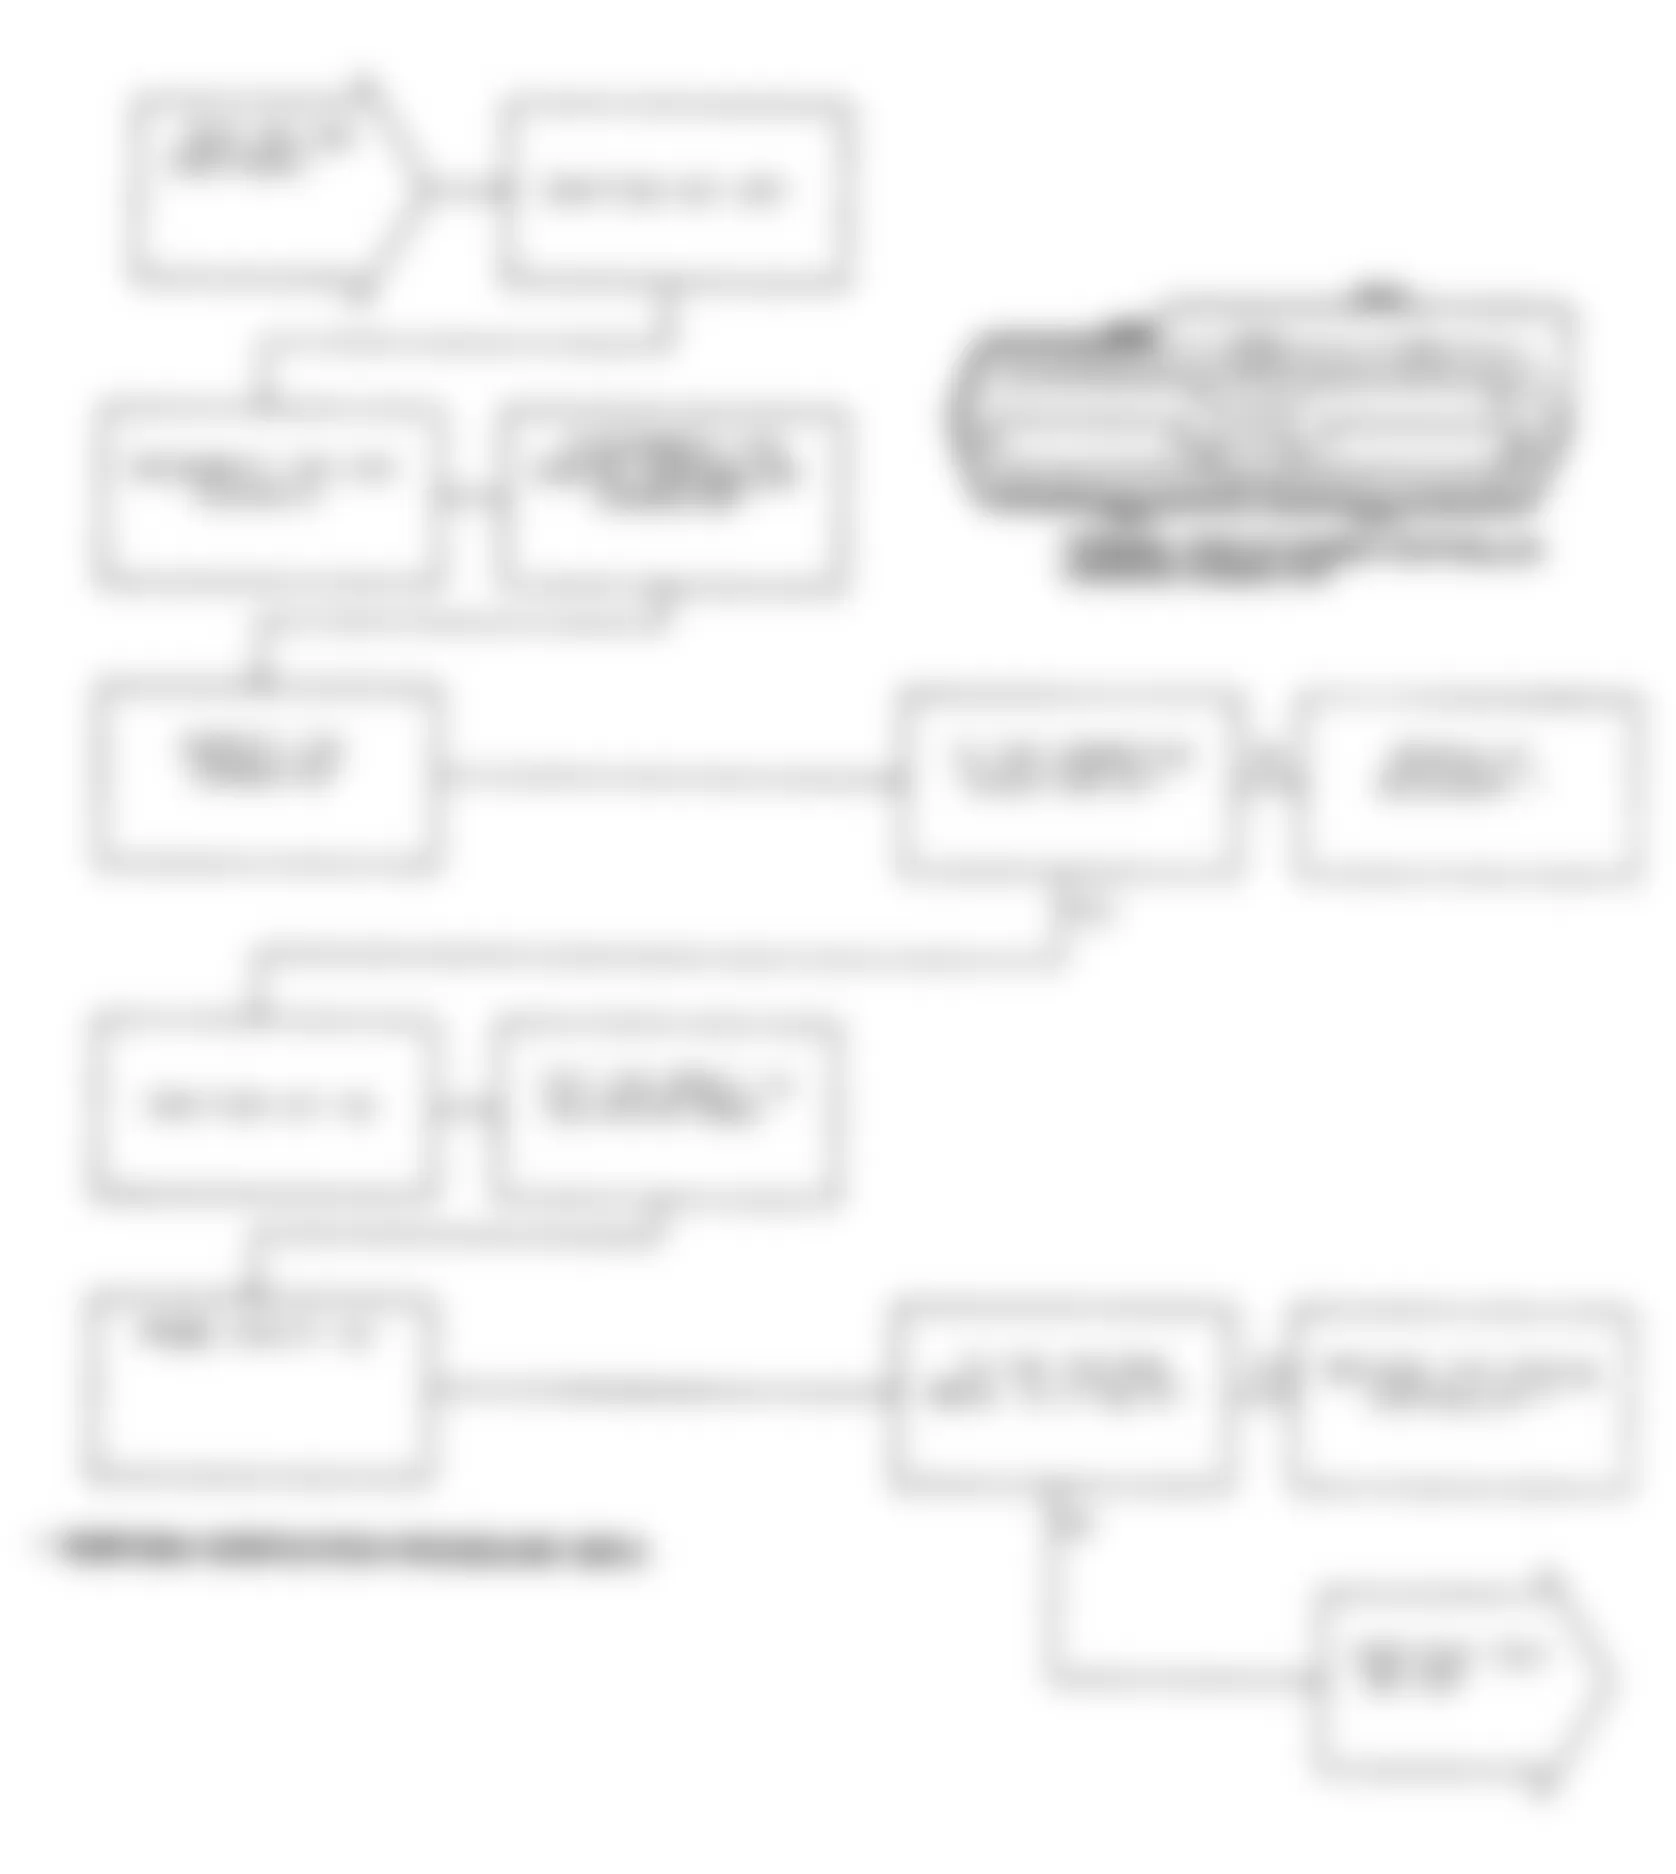 Dodge Daytona Shelby 1991 - Component Locations -  Test DR-19A Code 32, Diagnostic Flow Chart (2 of 3)